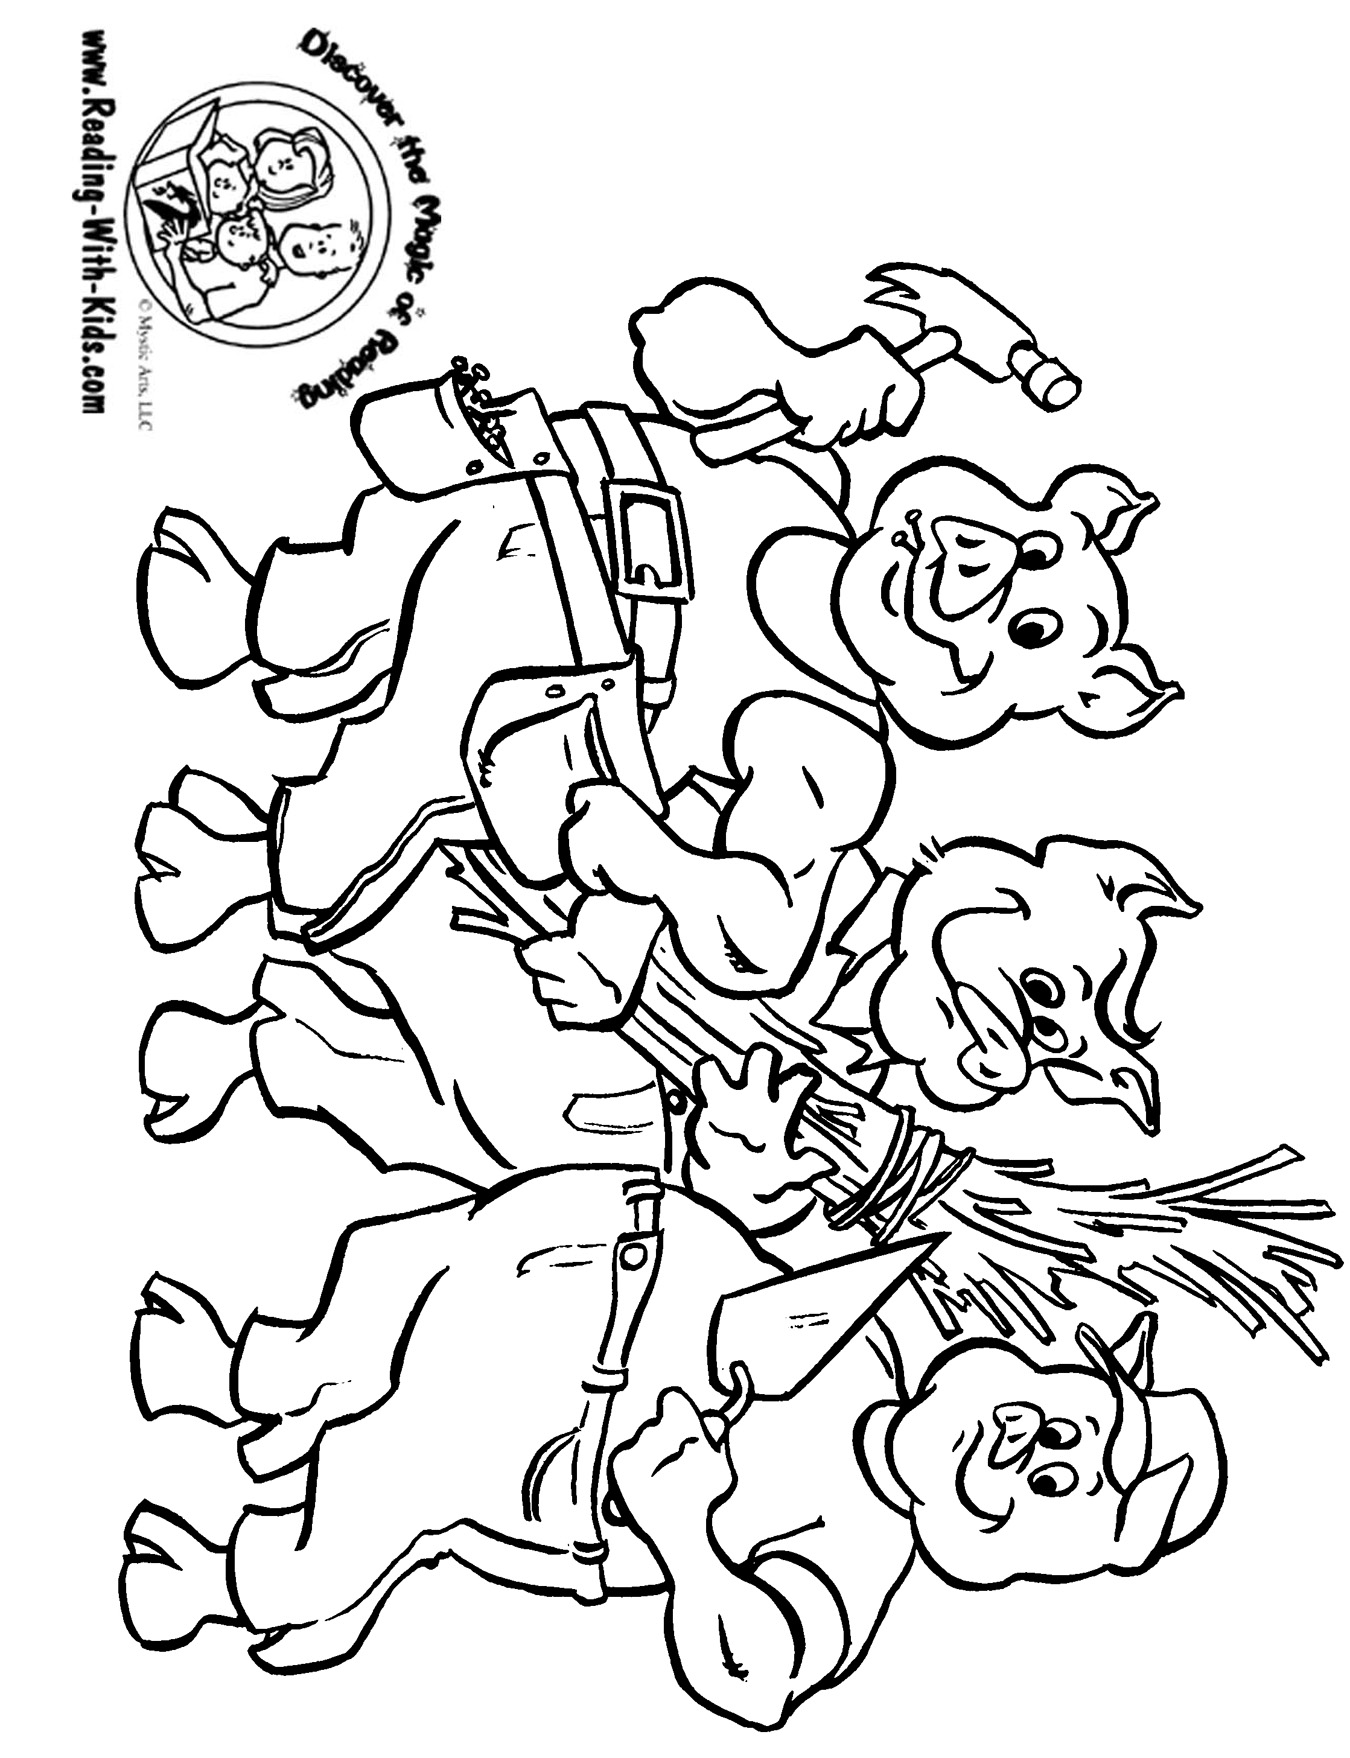 tall tale coloring pages - photo #23